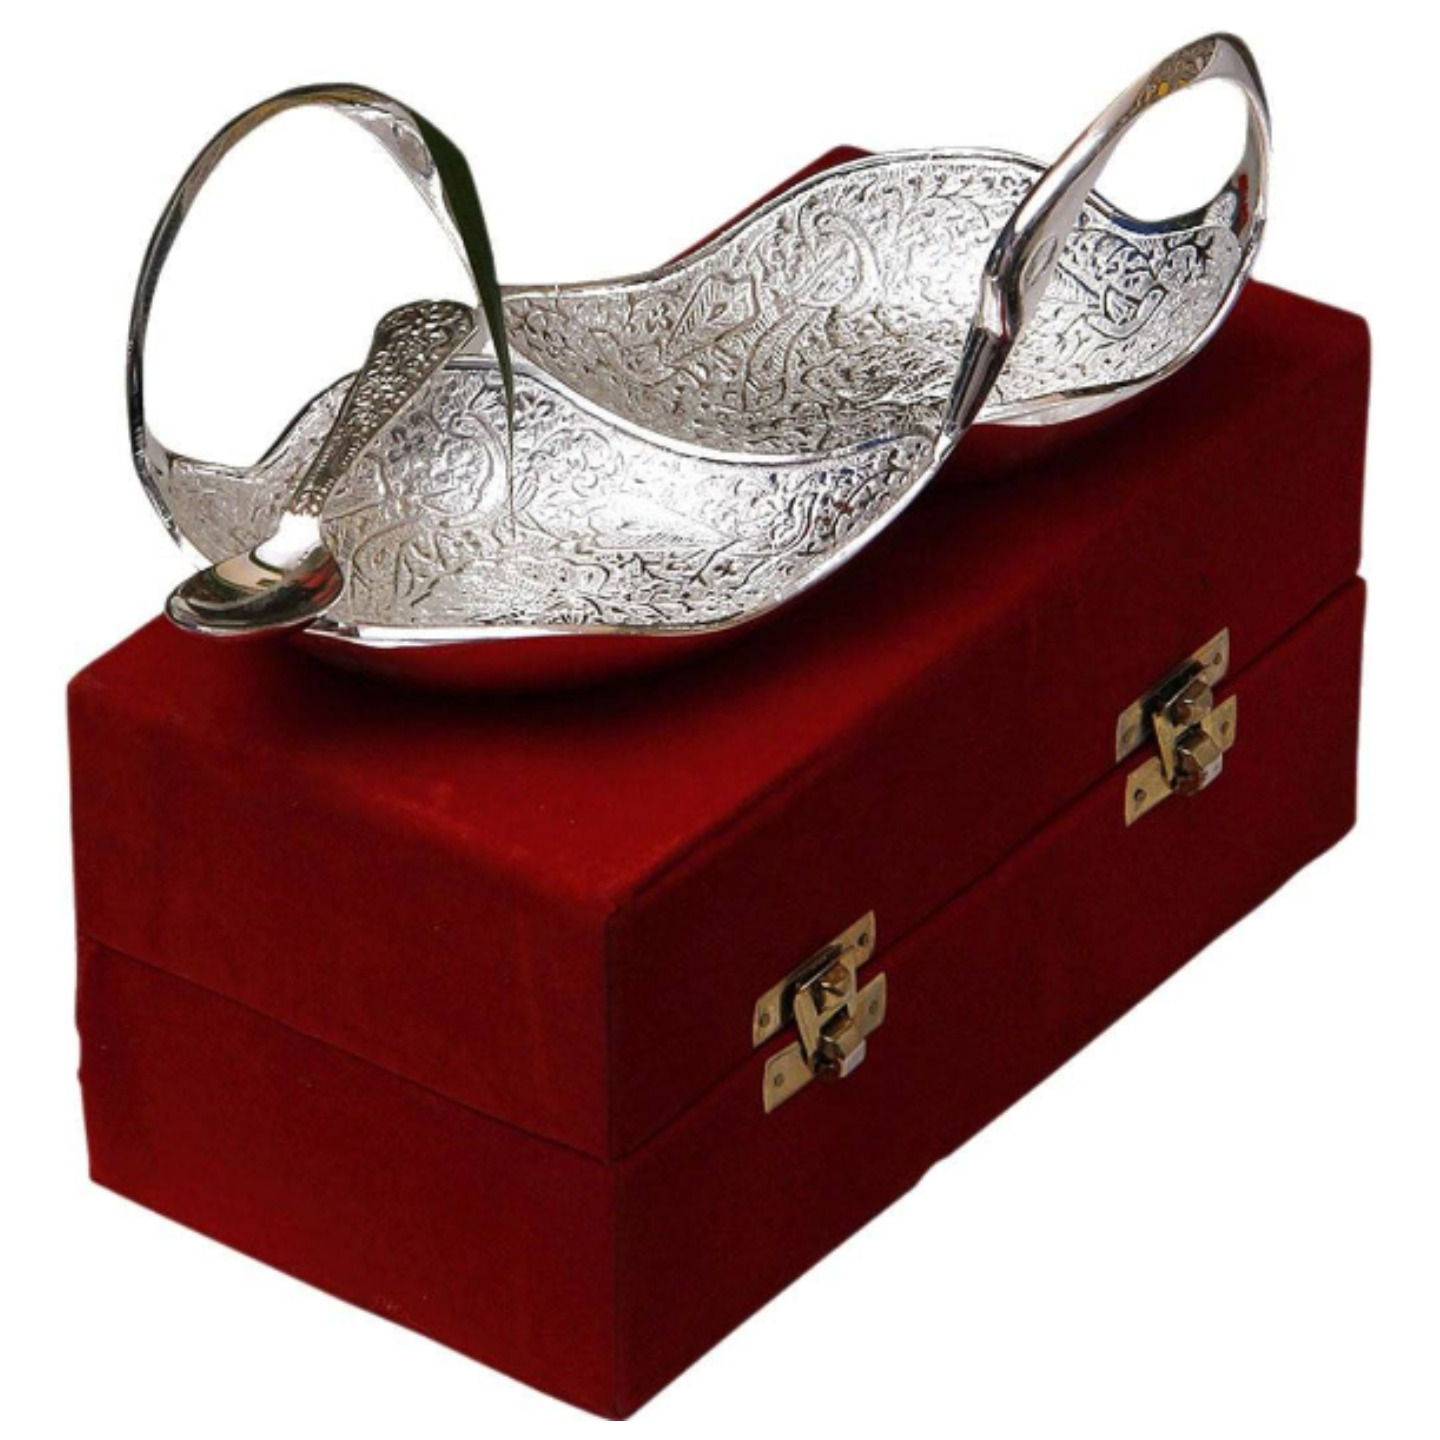 SILVER PLATED TWIN SWAN SHAPED BOWL WITH SPOON